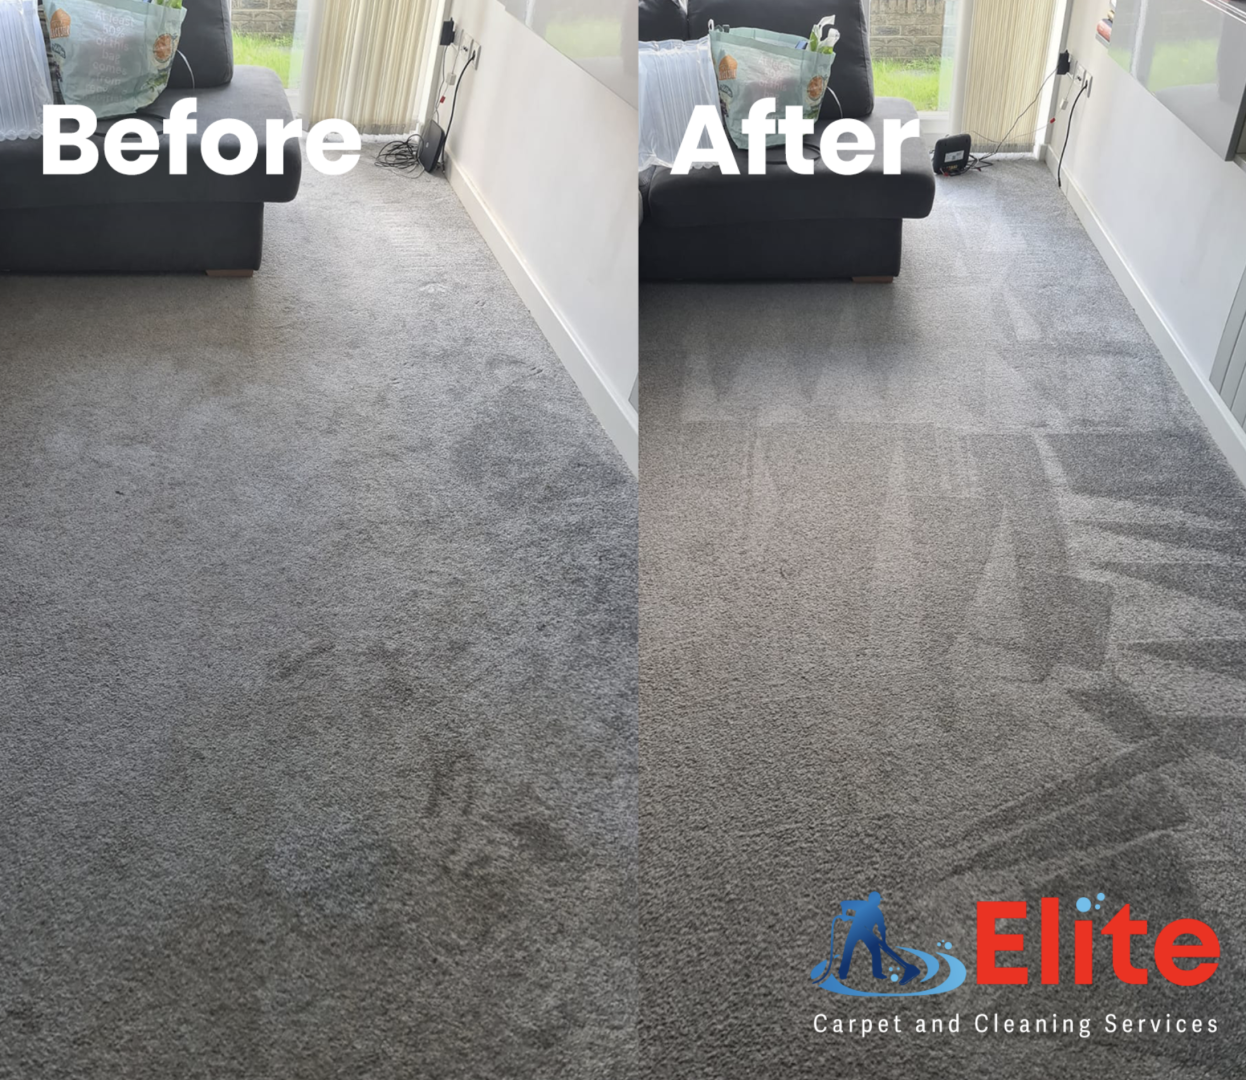 Elite Carpet & Cleaning Service in Ashley Cross / Lower Parkstone (5)